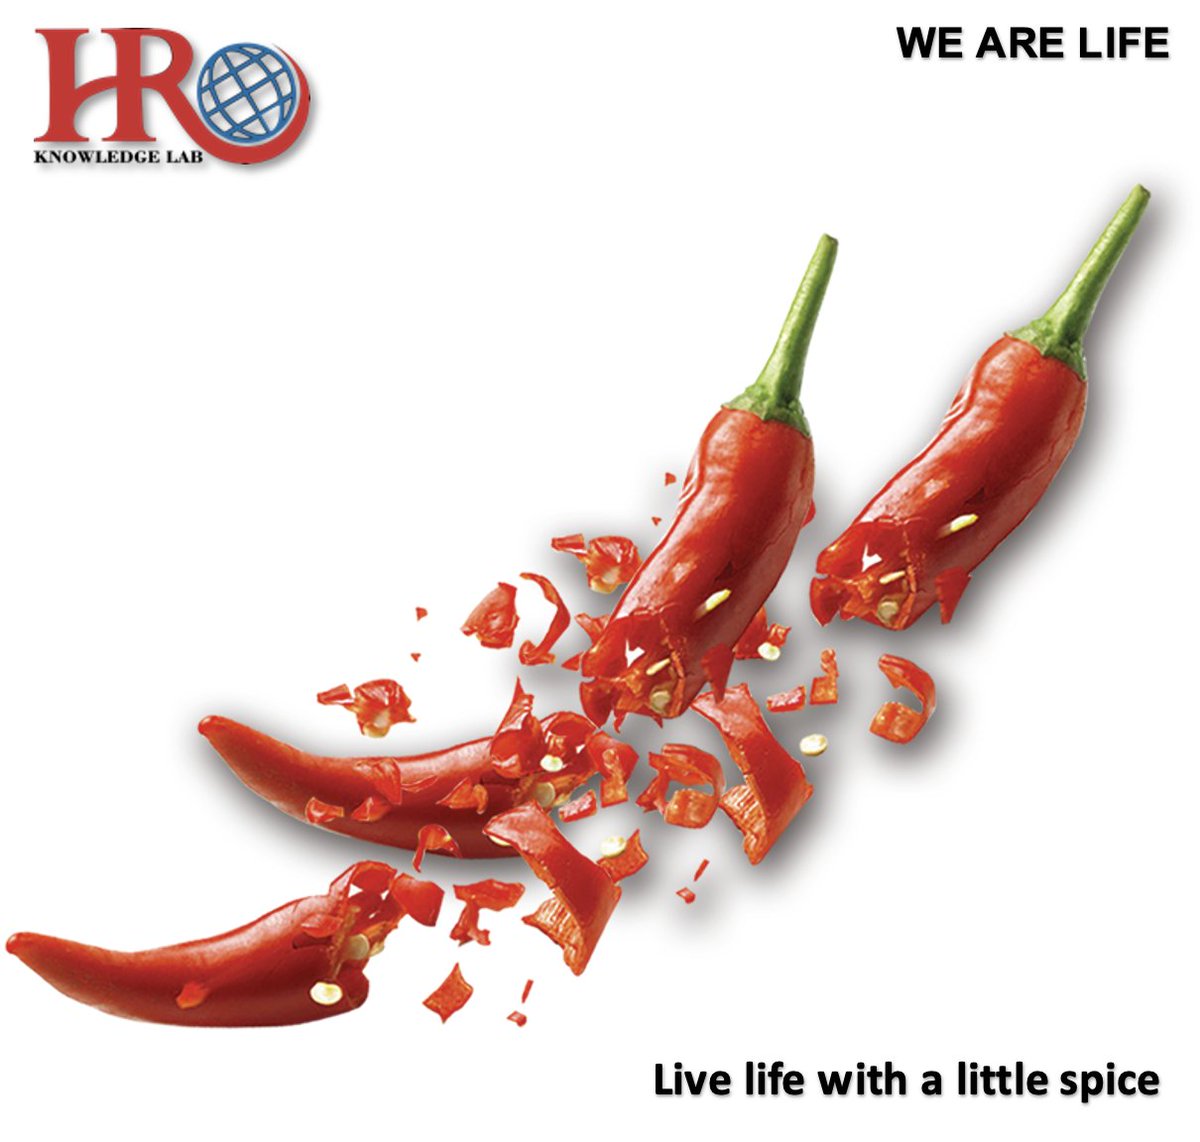 Give yourself sometime and add spice to life.
#hrknowledgelab #illustriouscircle #hrklsolutions #hrklinnovation #hrklresearch #HR #HRStrategy #hrsuccess #hrmanagement #hrchallenges #hrinnovation #hrjob #staremployees #SmartEmployee #spiceupyourlife #spicechallenge #spicycareer